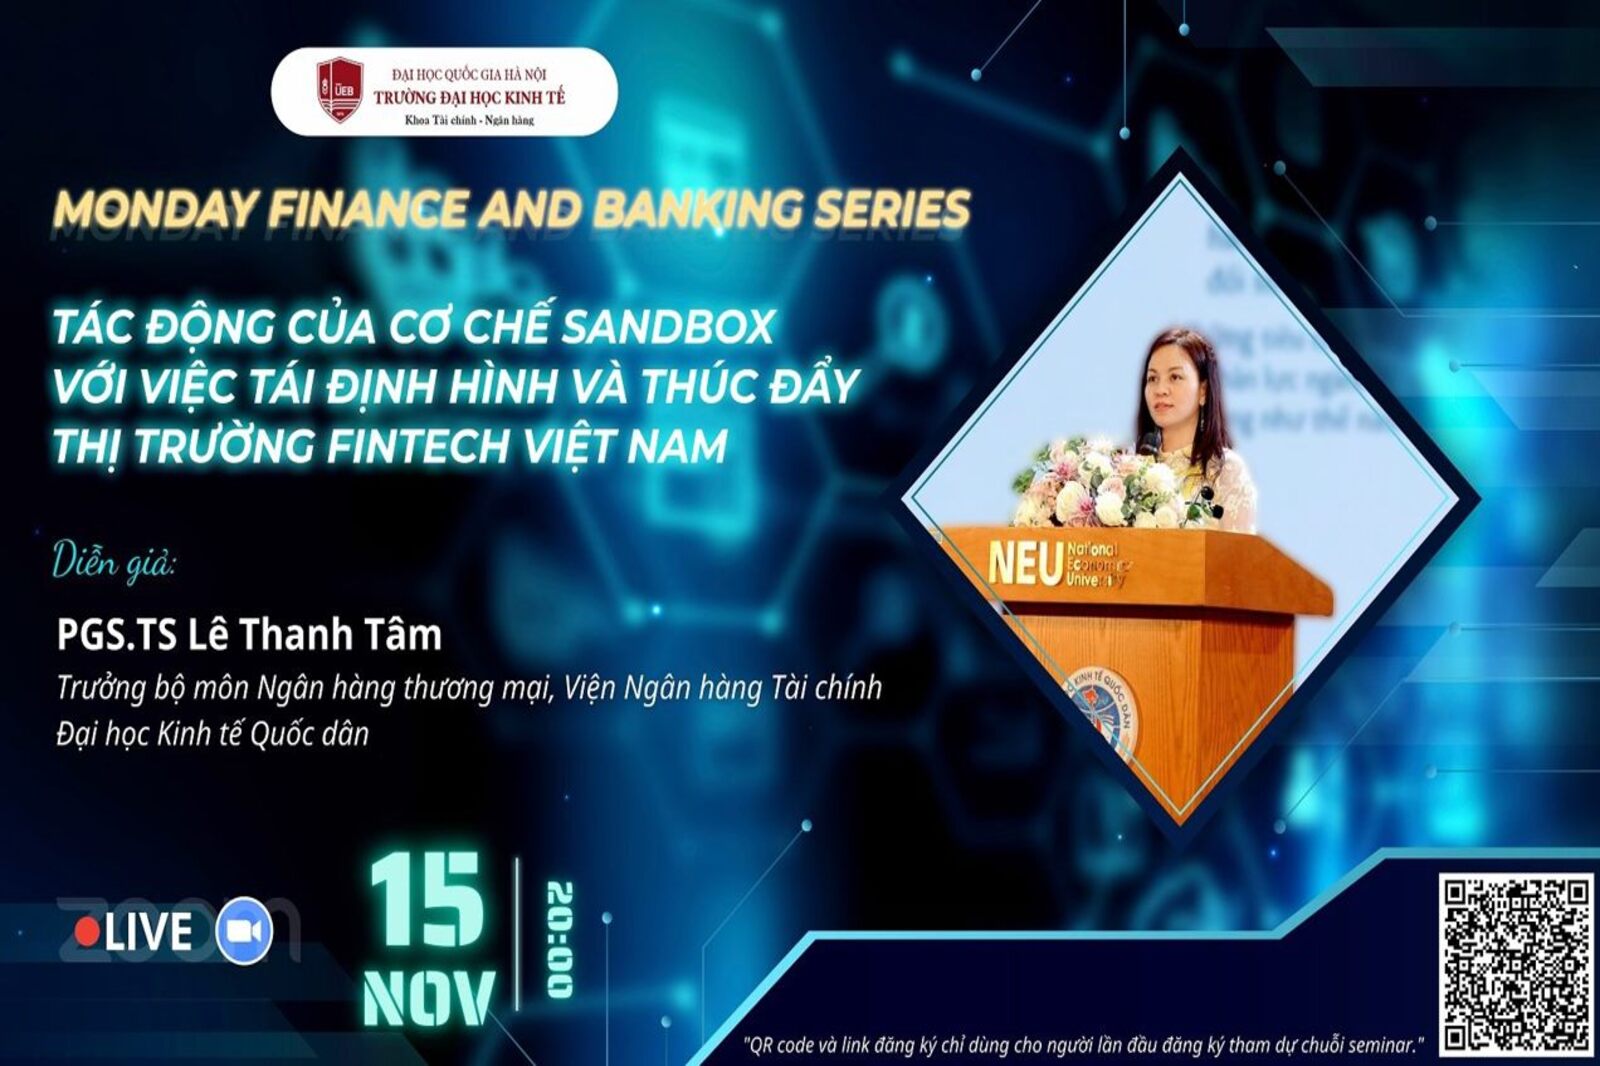 TB: Monday Finance and Banking Series số 16